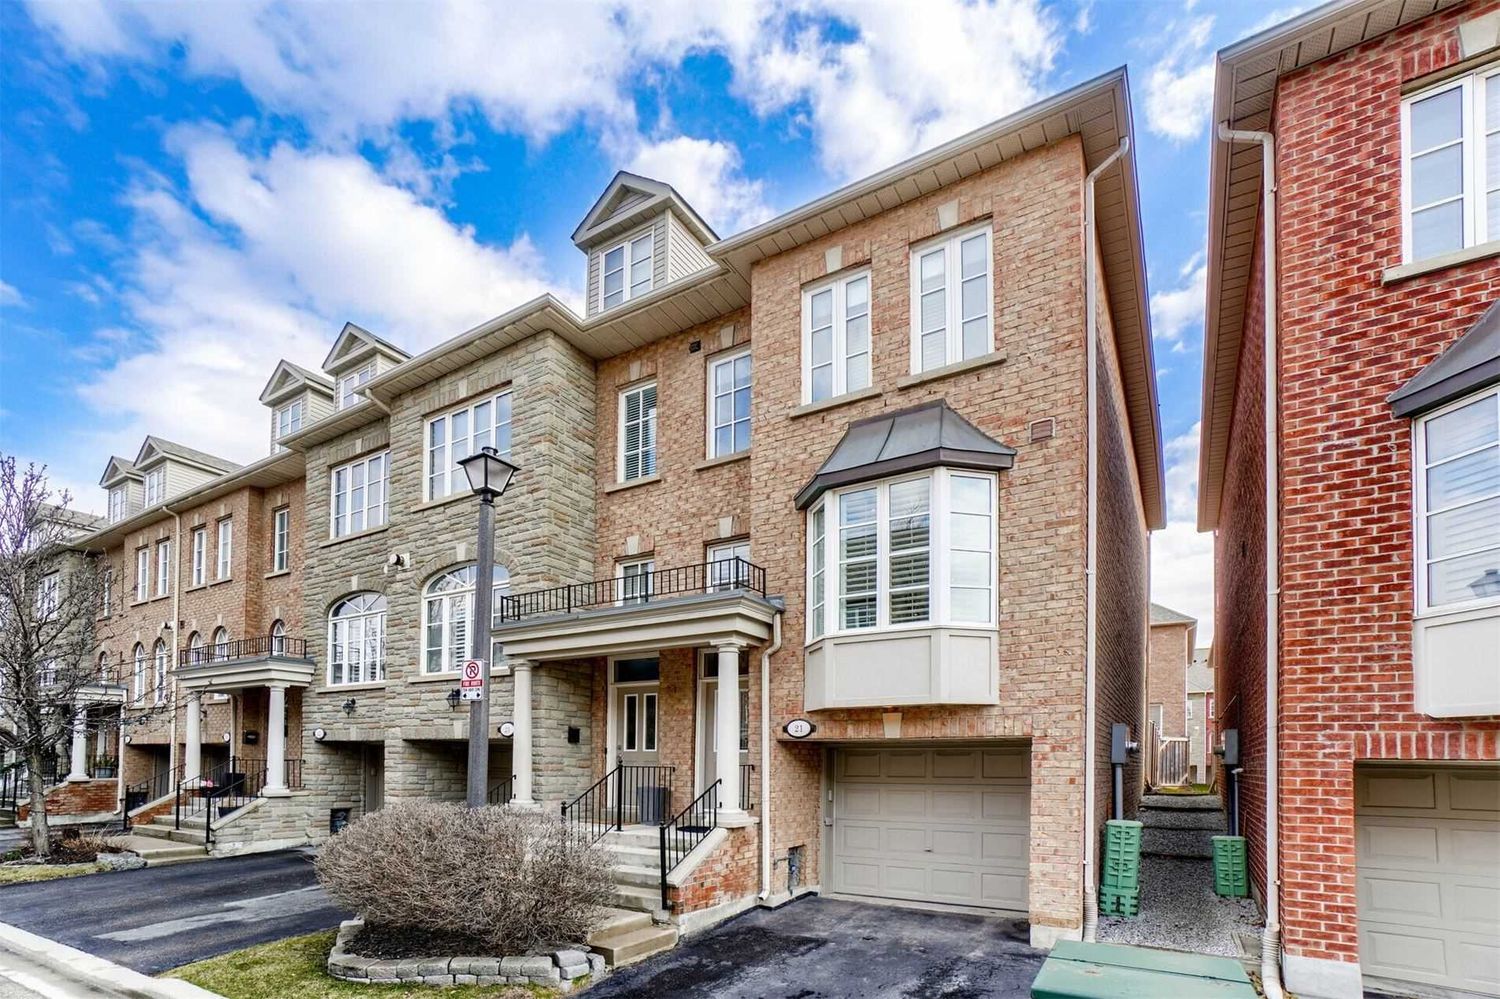 112-116 Evans Avenue. Oxford Court Townhouses is located in  Etobicoke, Toronto - image #1 of 2